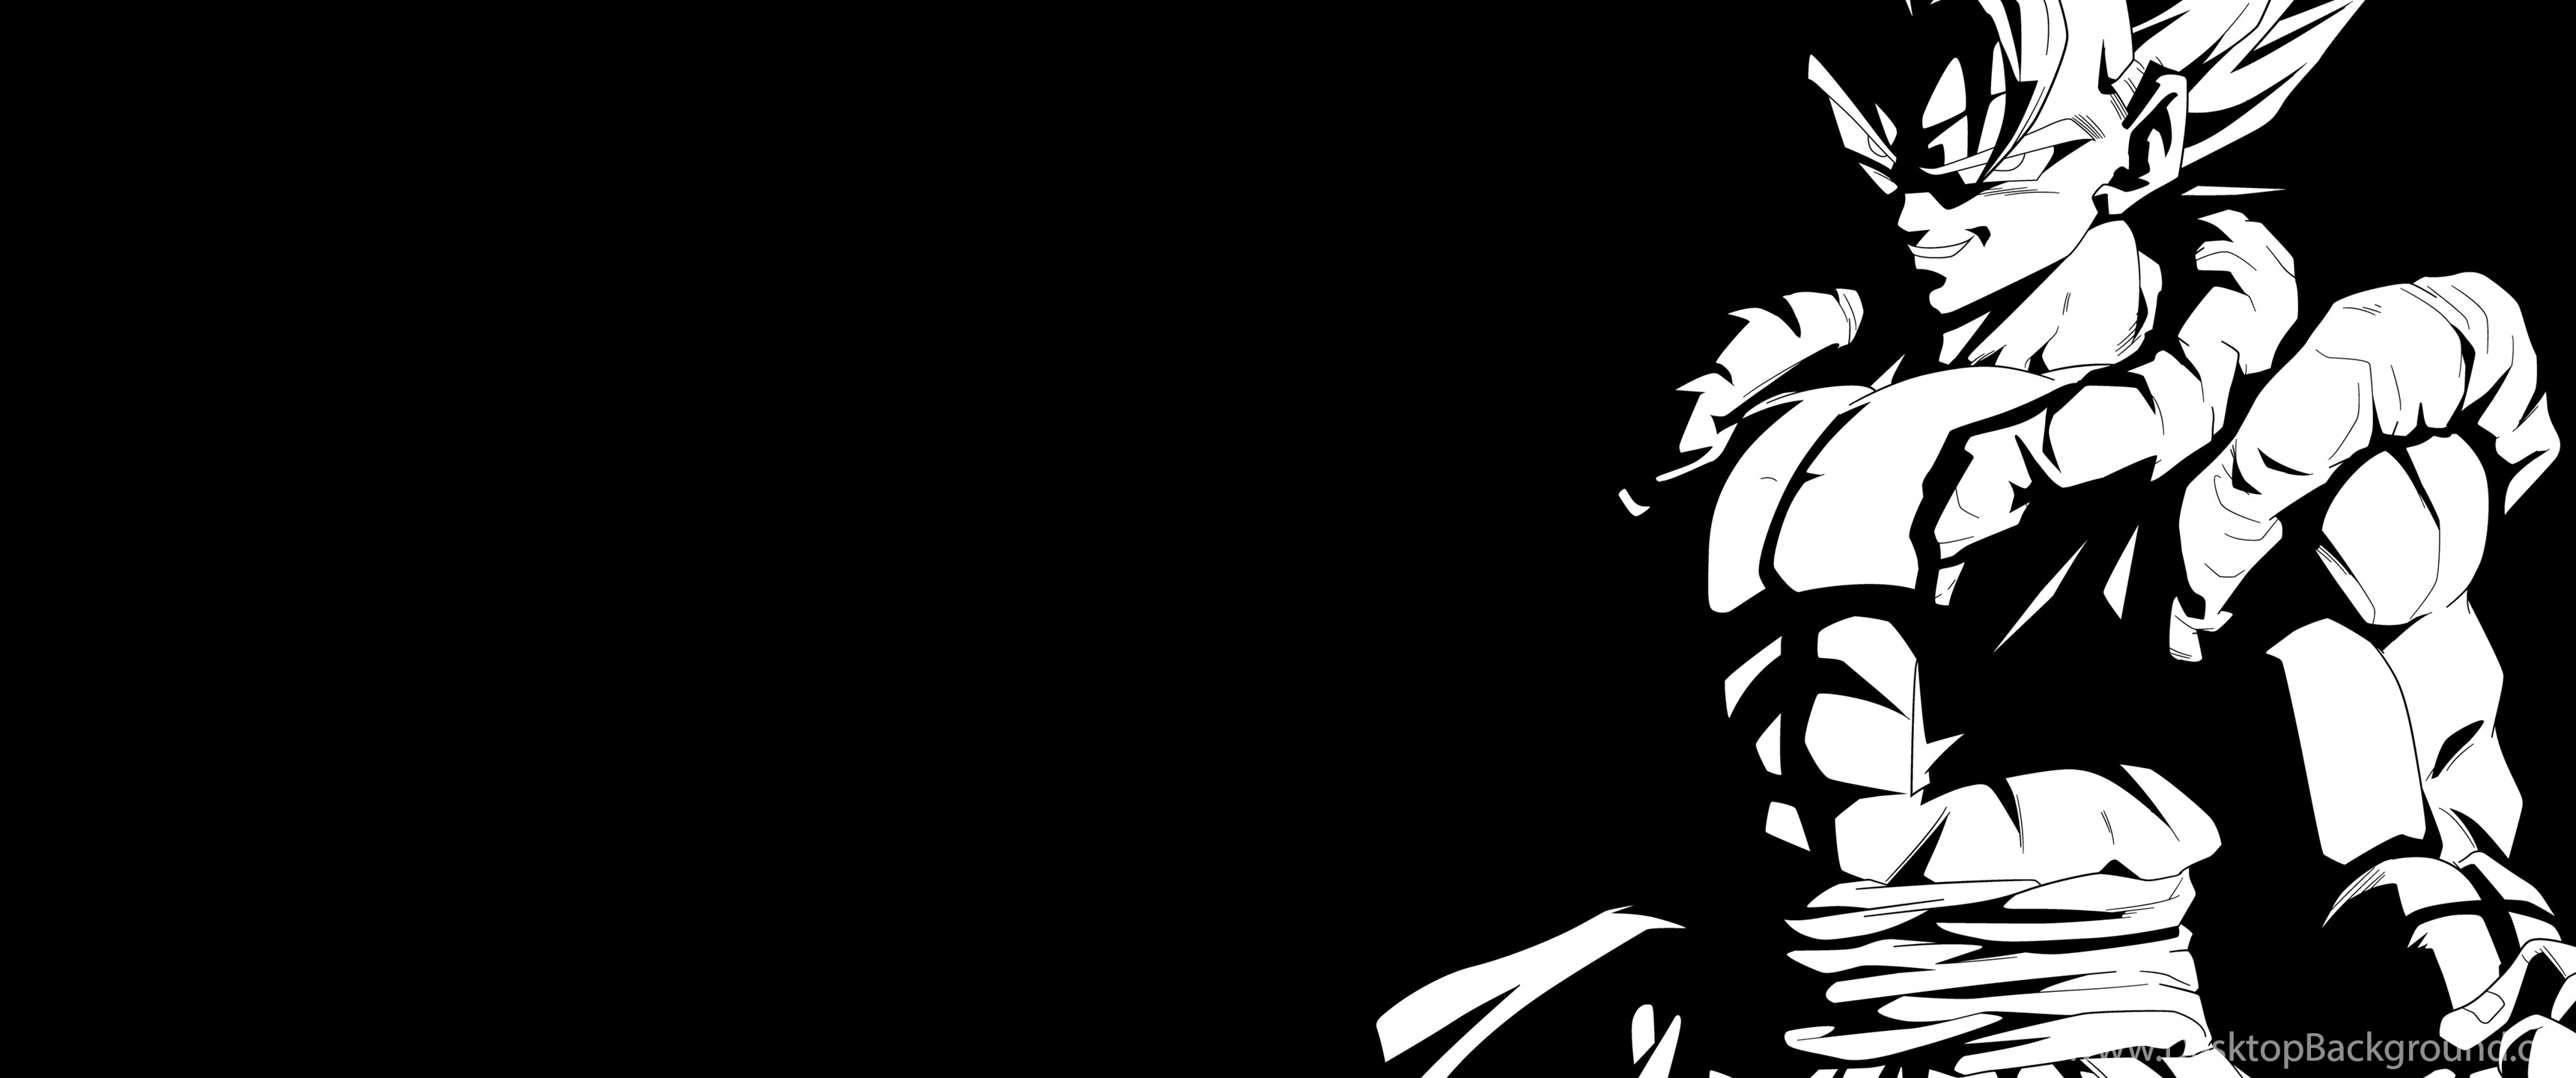 3440x1440 Super Gogeta Black And White 4K Wallpaper By RayzorBlade189 On